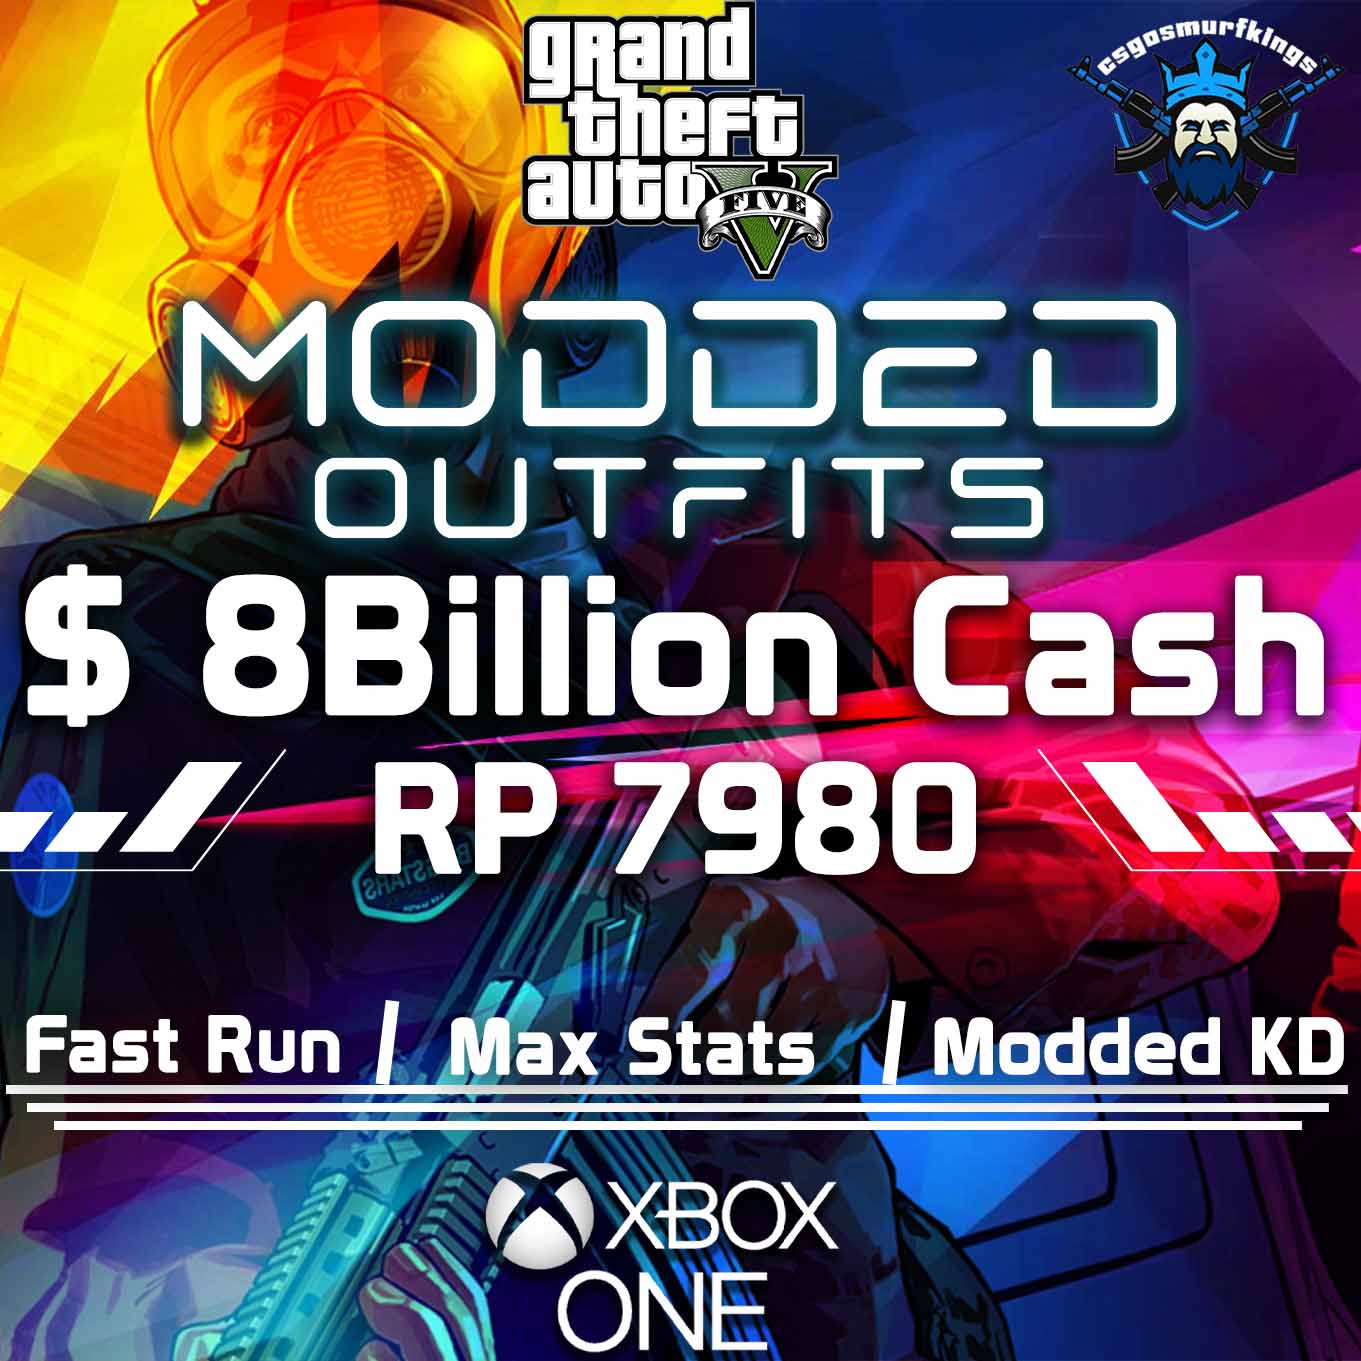 GTA 5, 7.8 Billion Cash! FEMALE Mod Outfits! LIMITED TIME DEAL! (PS5/XBOX)